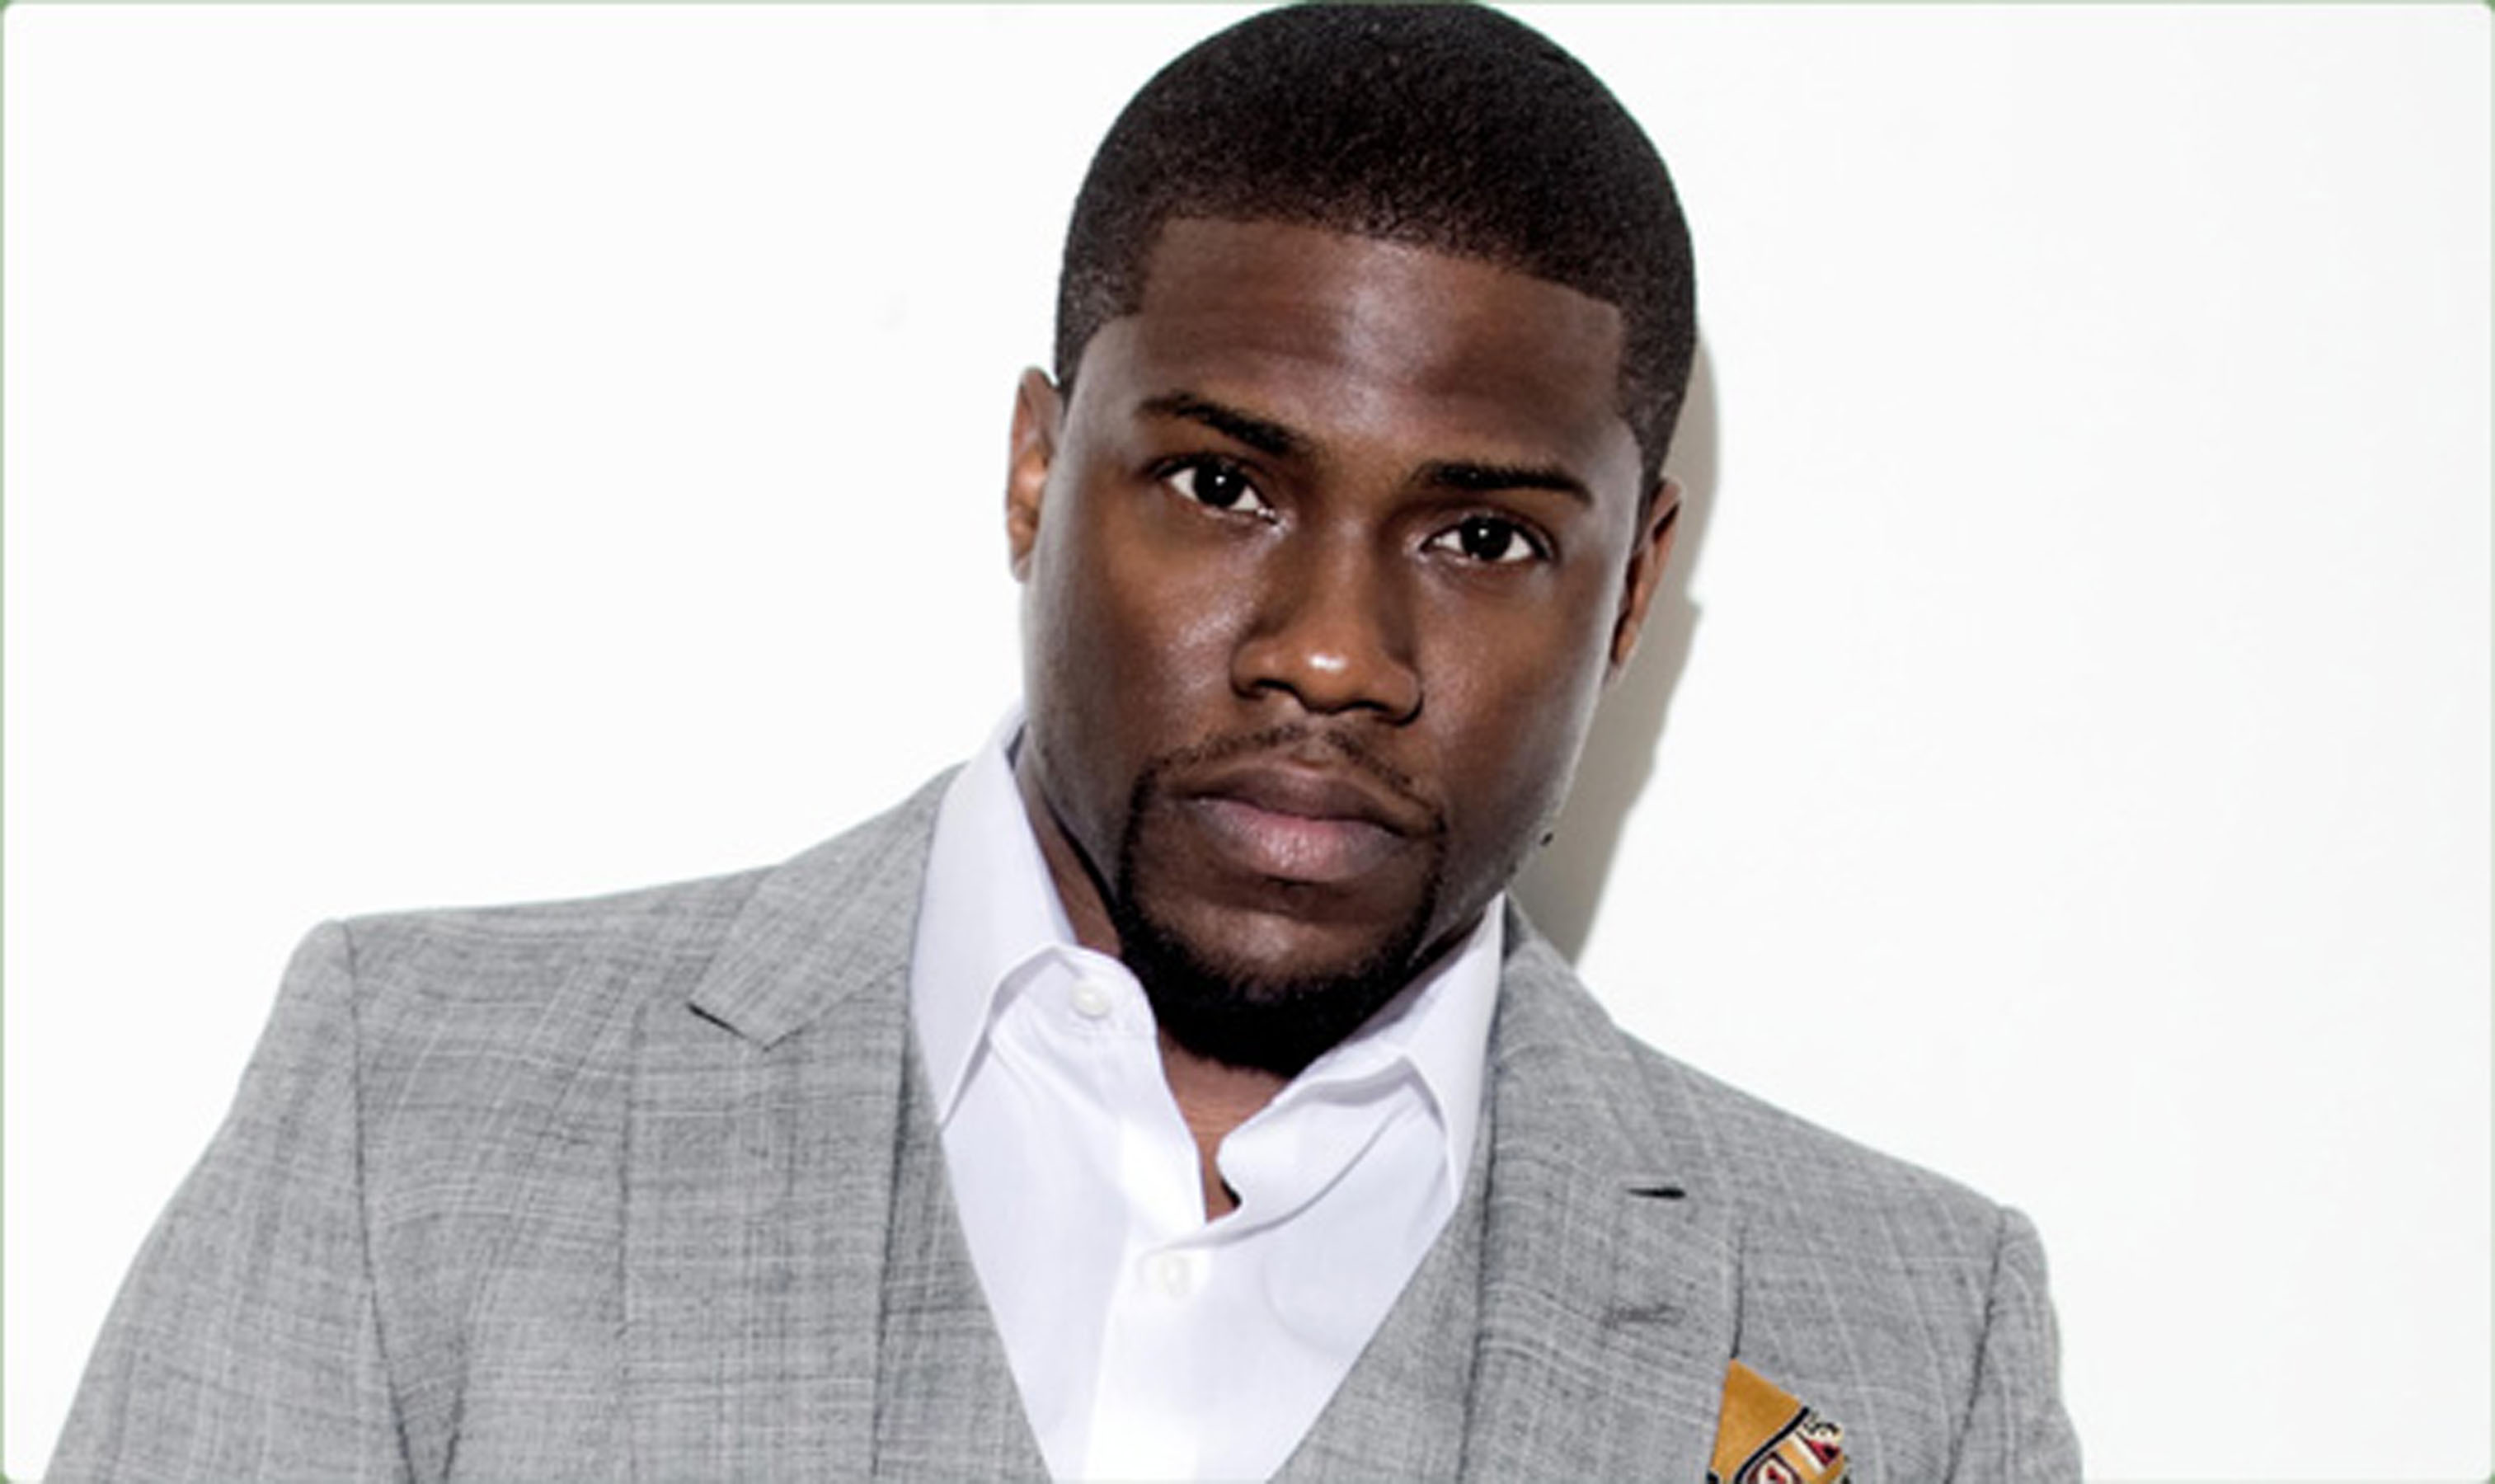 Kevin Hart Steps Down as the Oscar Host, Denies to Apologize